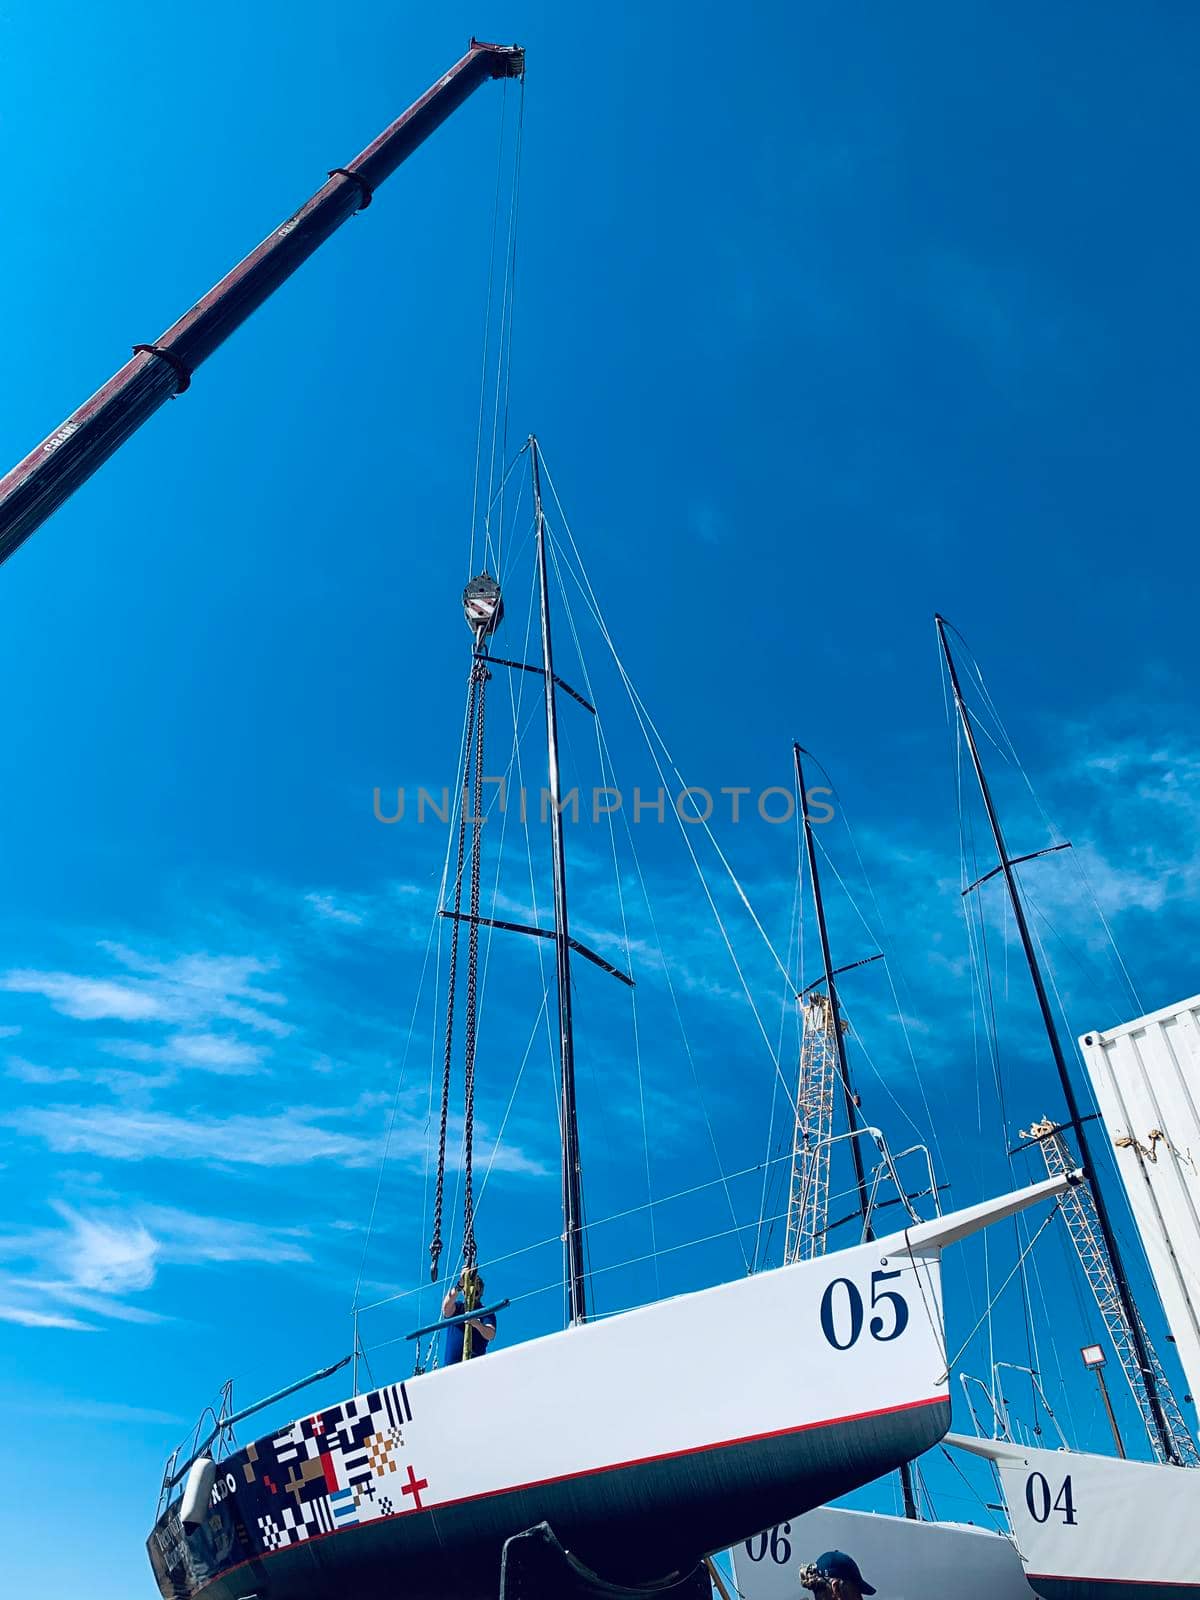 Russia, St.Petersburg, 26 May 2020: Port Hercules, the big industrial crane lifts the sailboat and floats it, the beginning of a season of sailing, a skyscraper on a background, sailboat is groundless, sunny weather